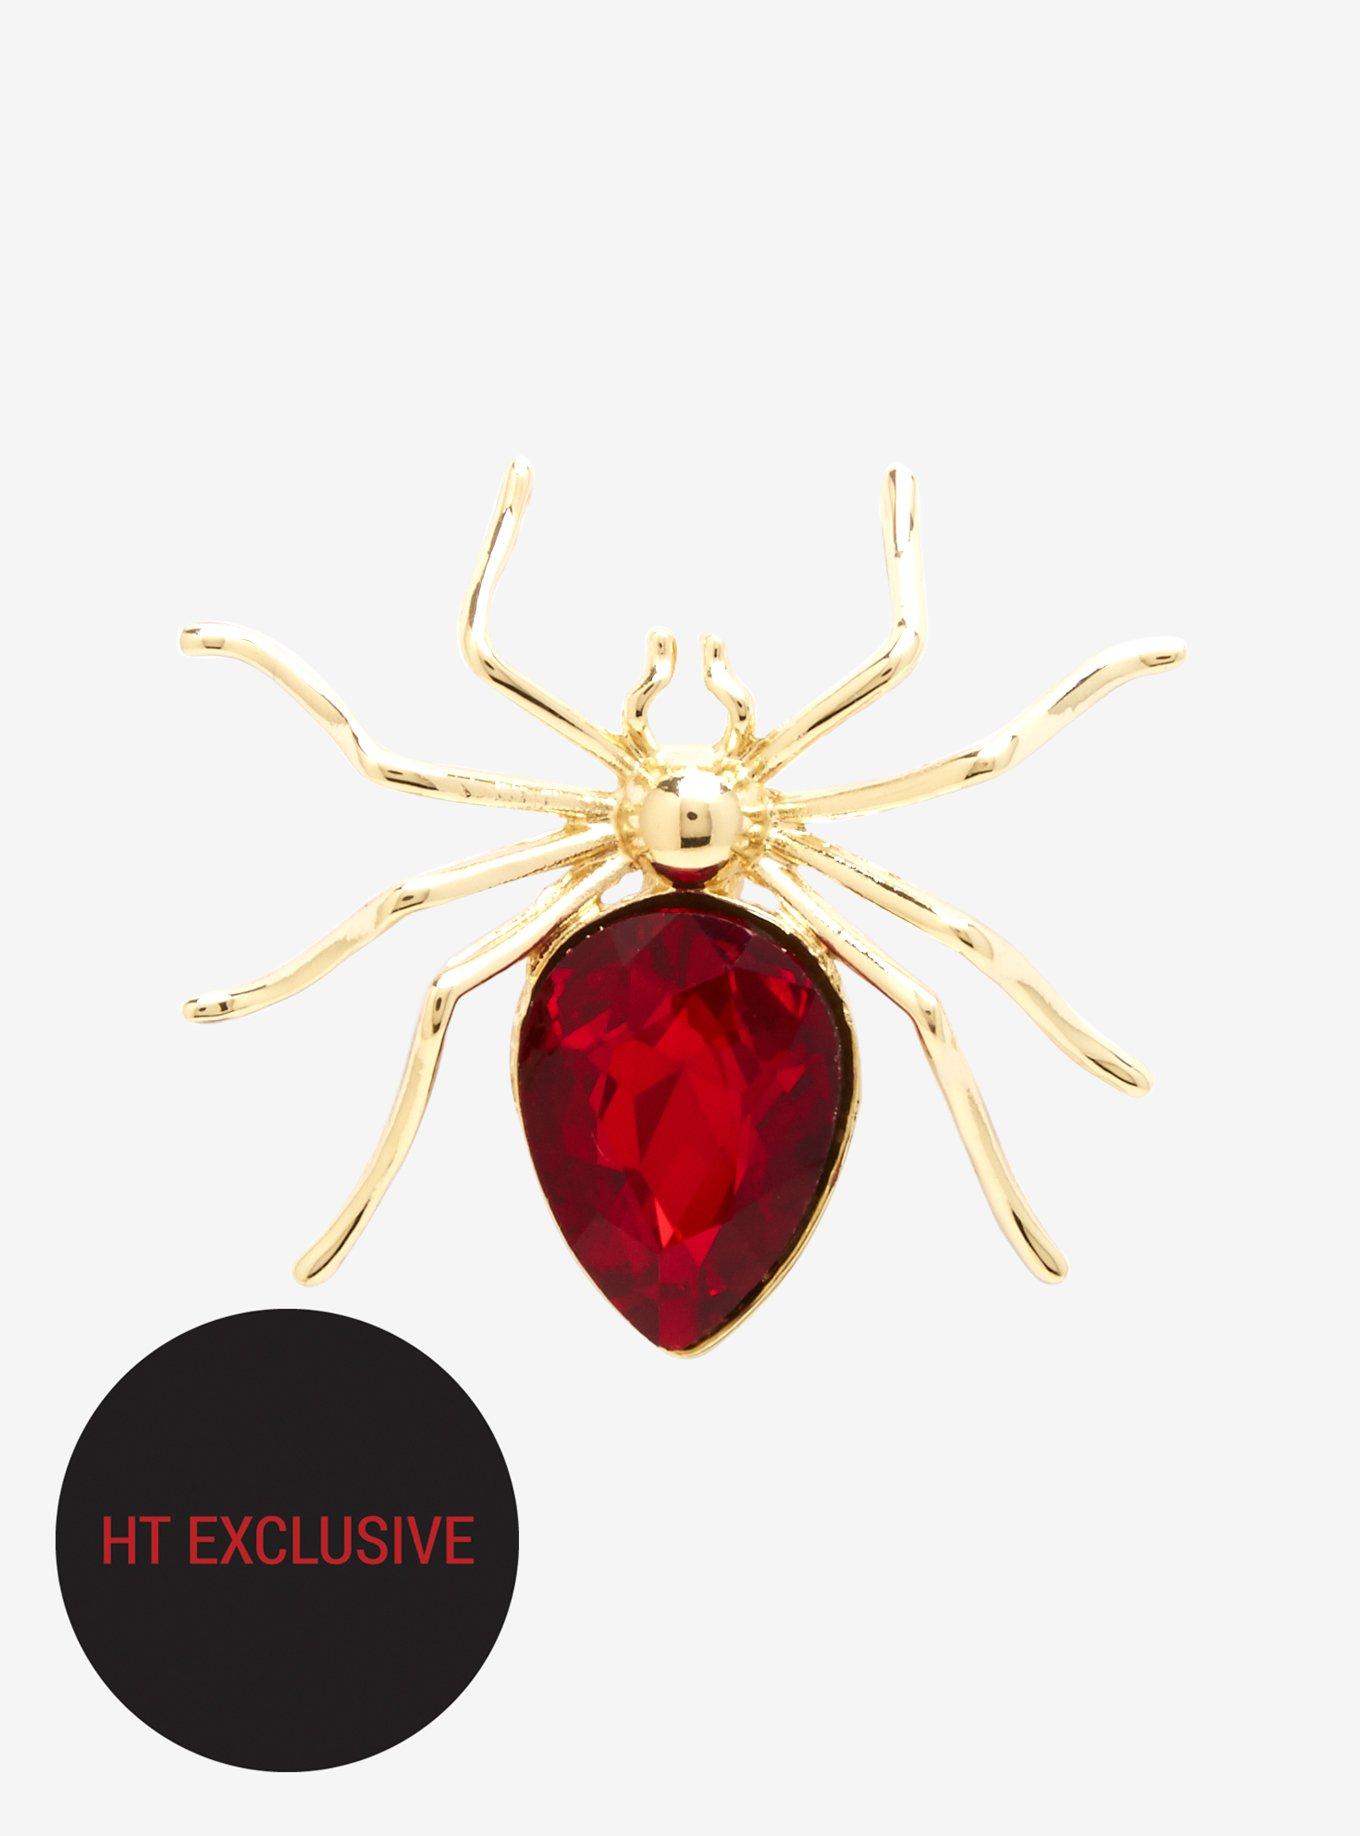 Buy Riverdale Cheryl Blossom Red Spider PIN Brooch HT Exclusive